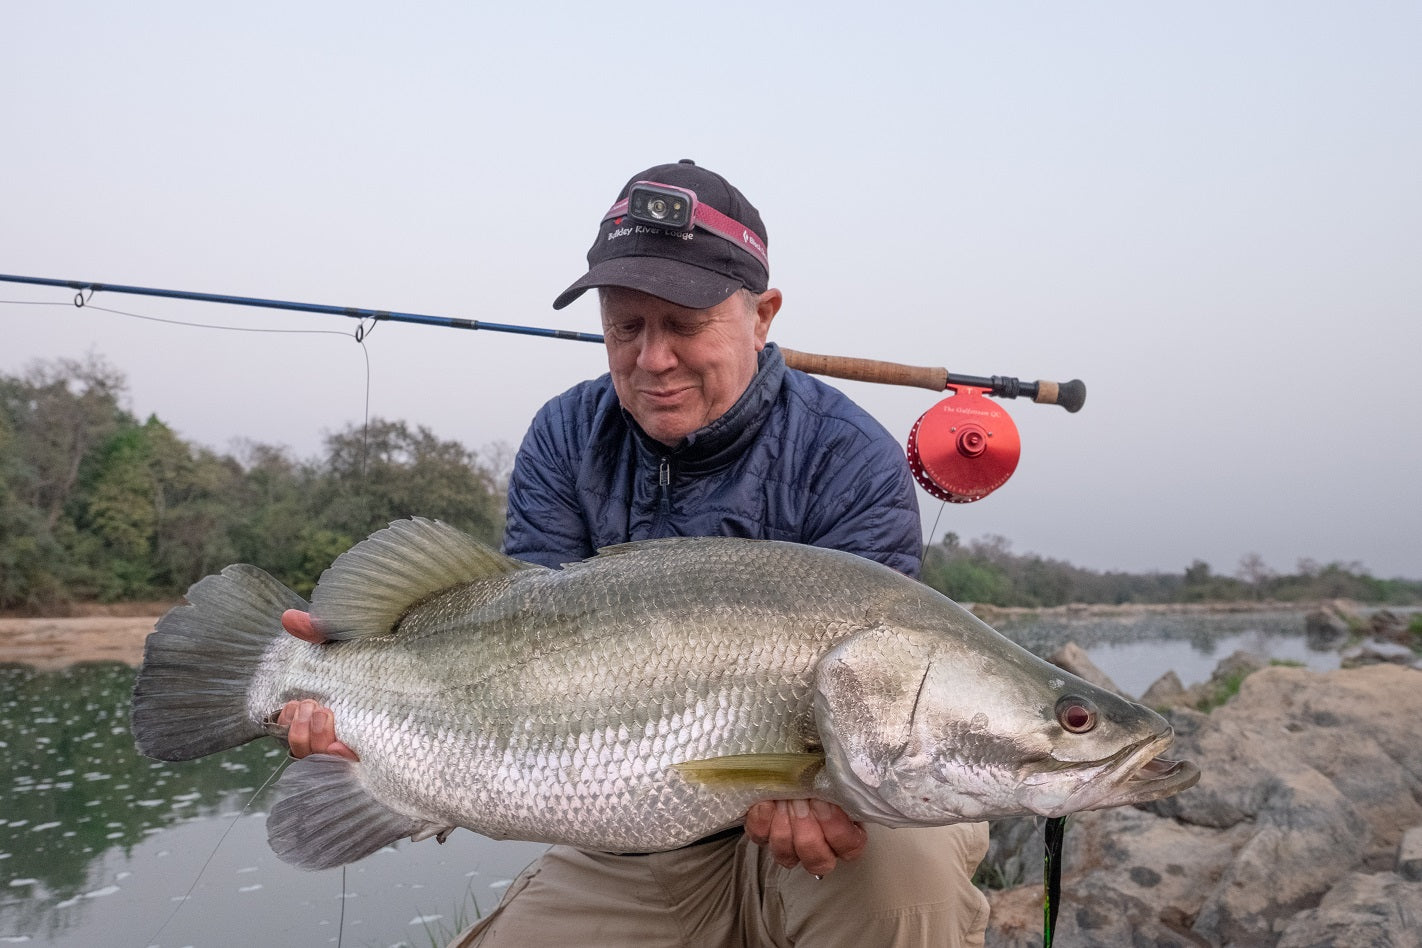 Nile perch fishing rods & equipment — Fishing tackle and reels in